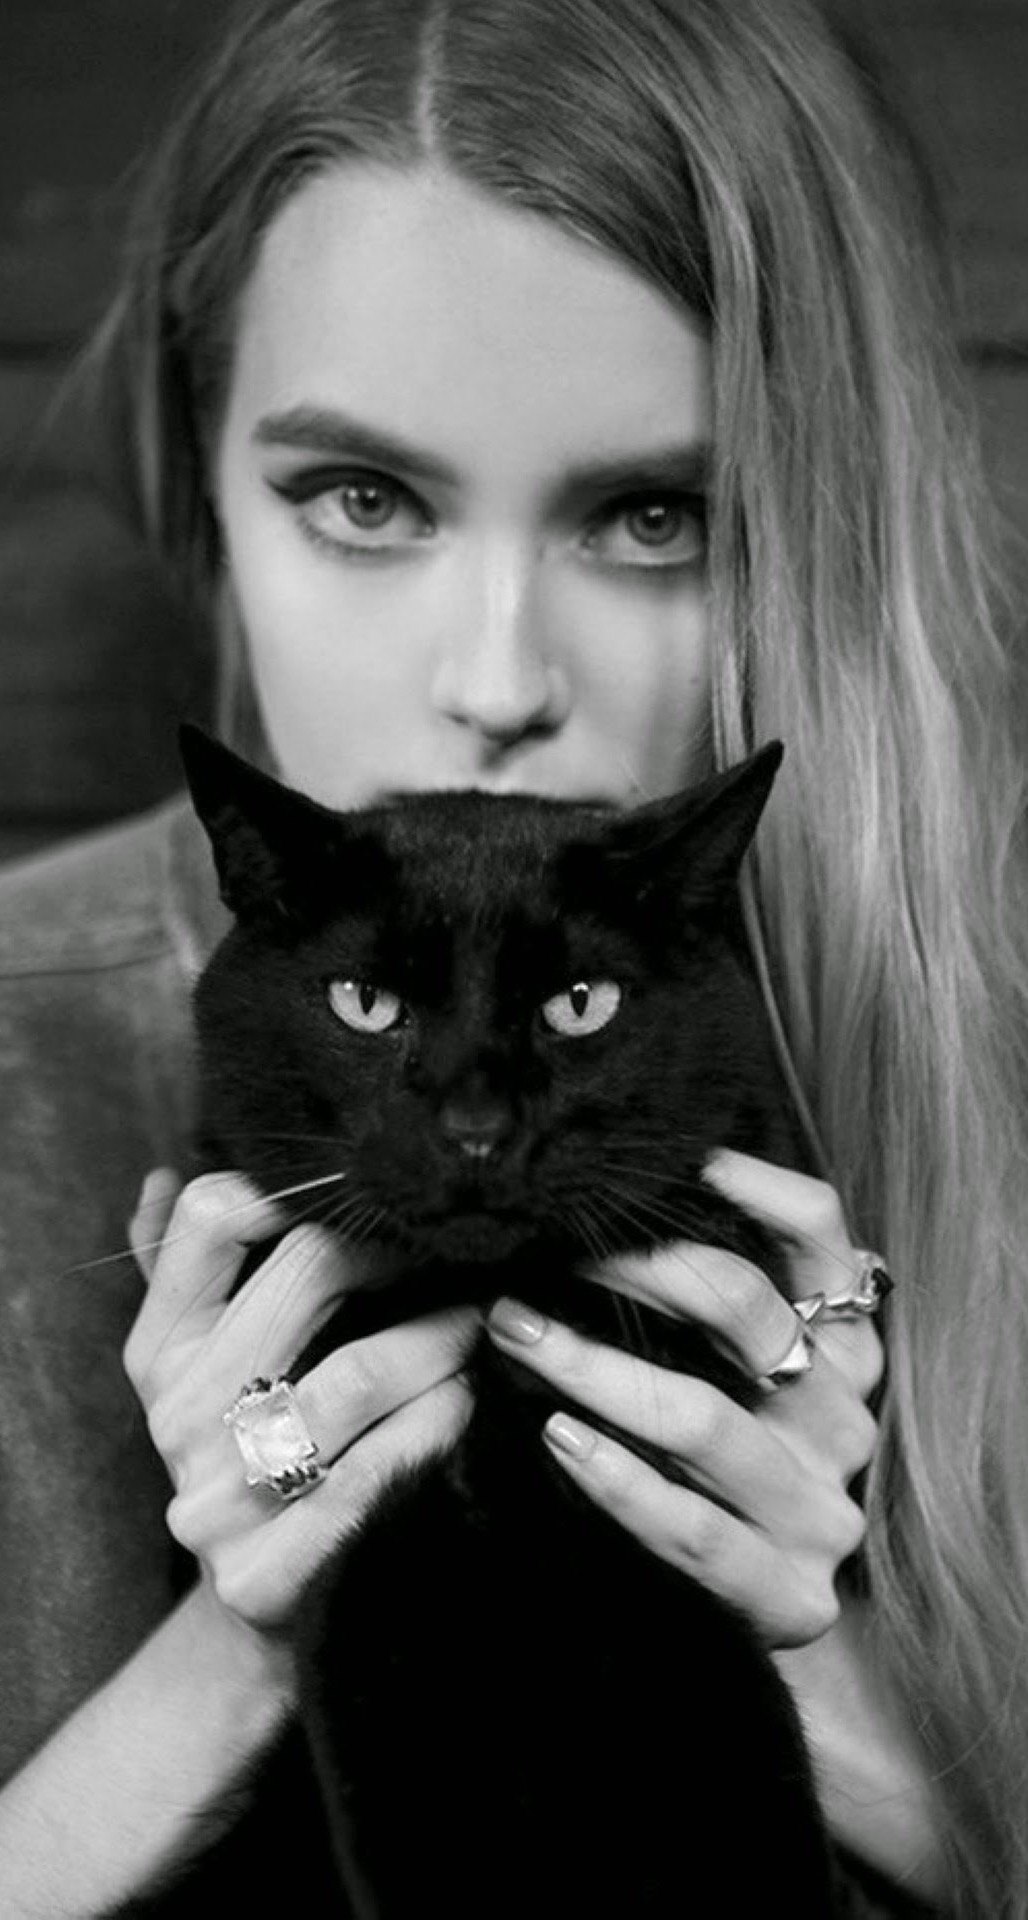 Blonde-Girl-With-Black-Cat-iPhone-6-Plus-HD-Wallpaper.